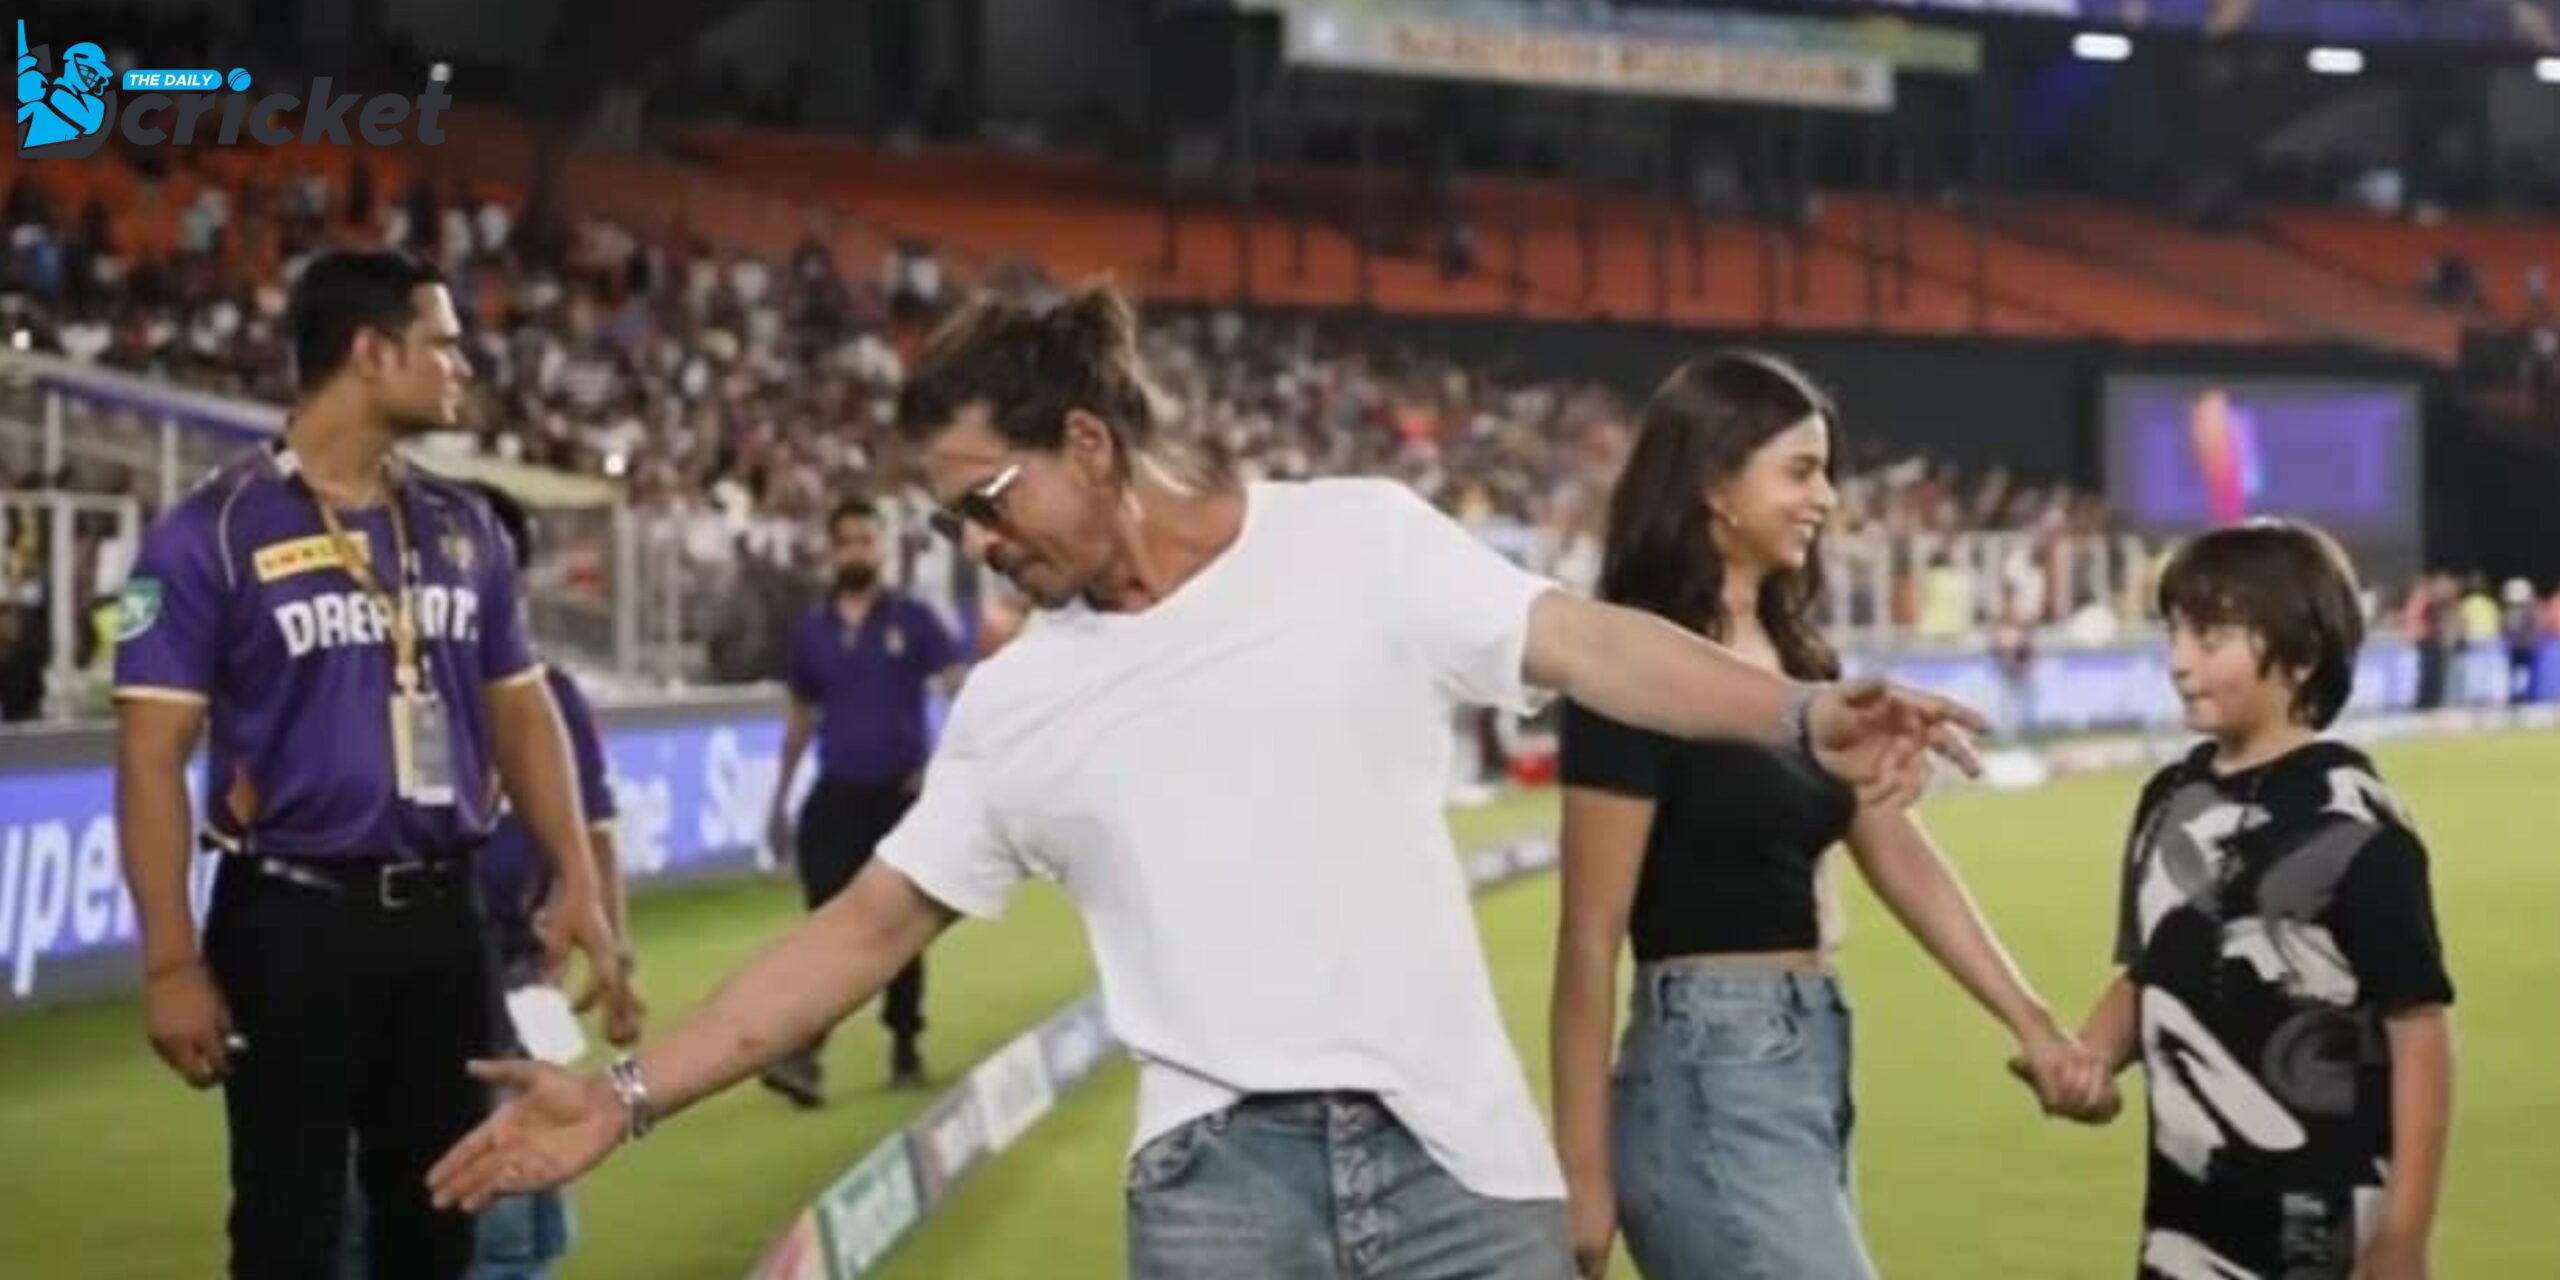 Suhana and AbRam's Epic Reaction to Shah Rukh Khan's Iconic Pose En Route to Final: Must-See Moment!